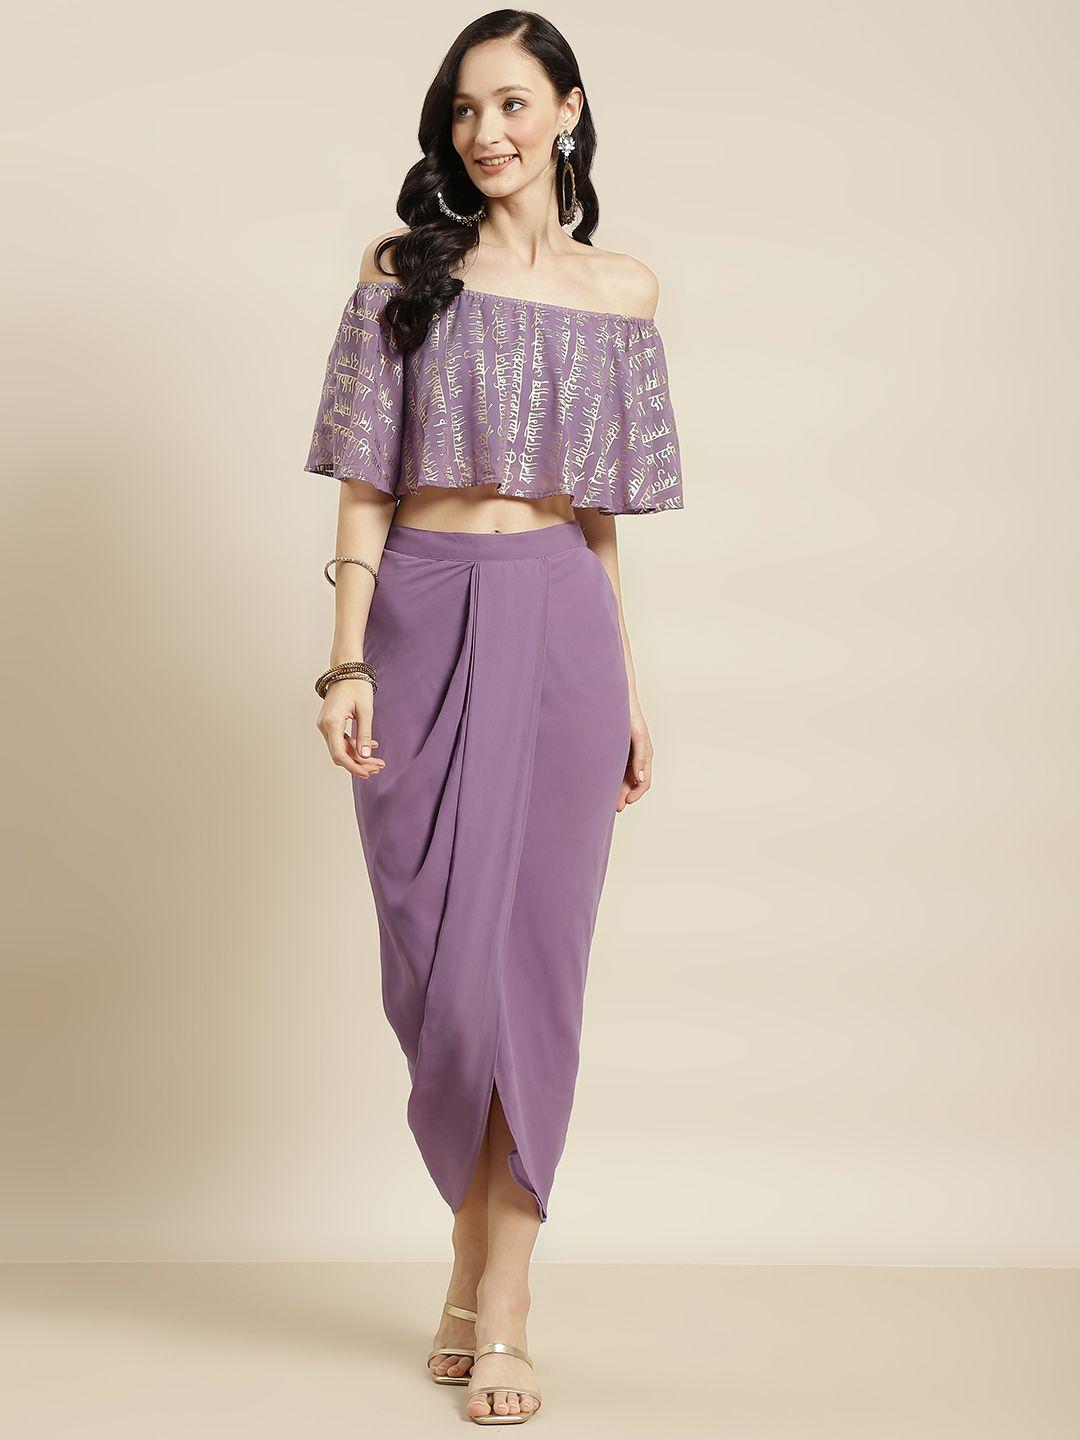 shae-by-sassafras-purple-foil-crop-top-with-dhoti-skirt